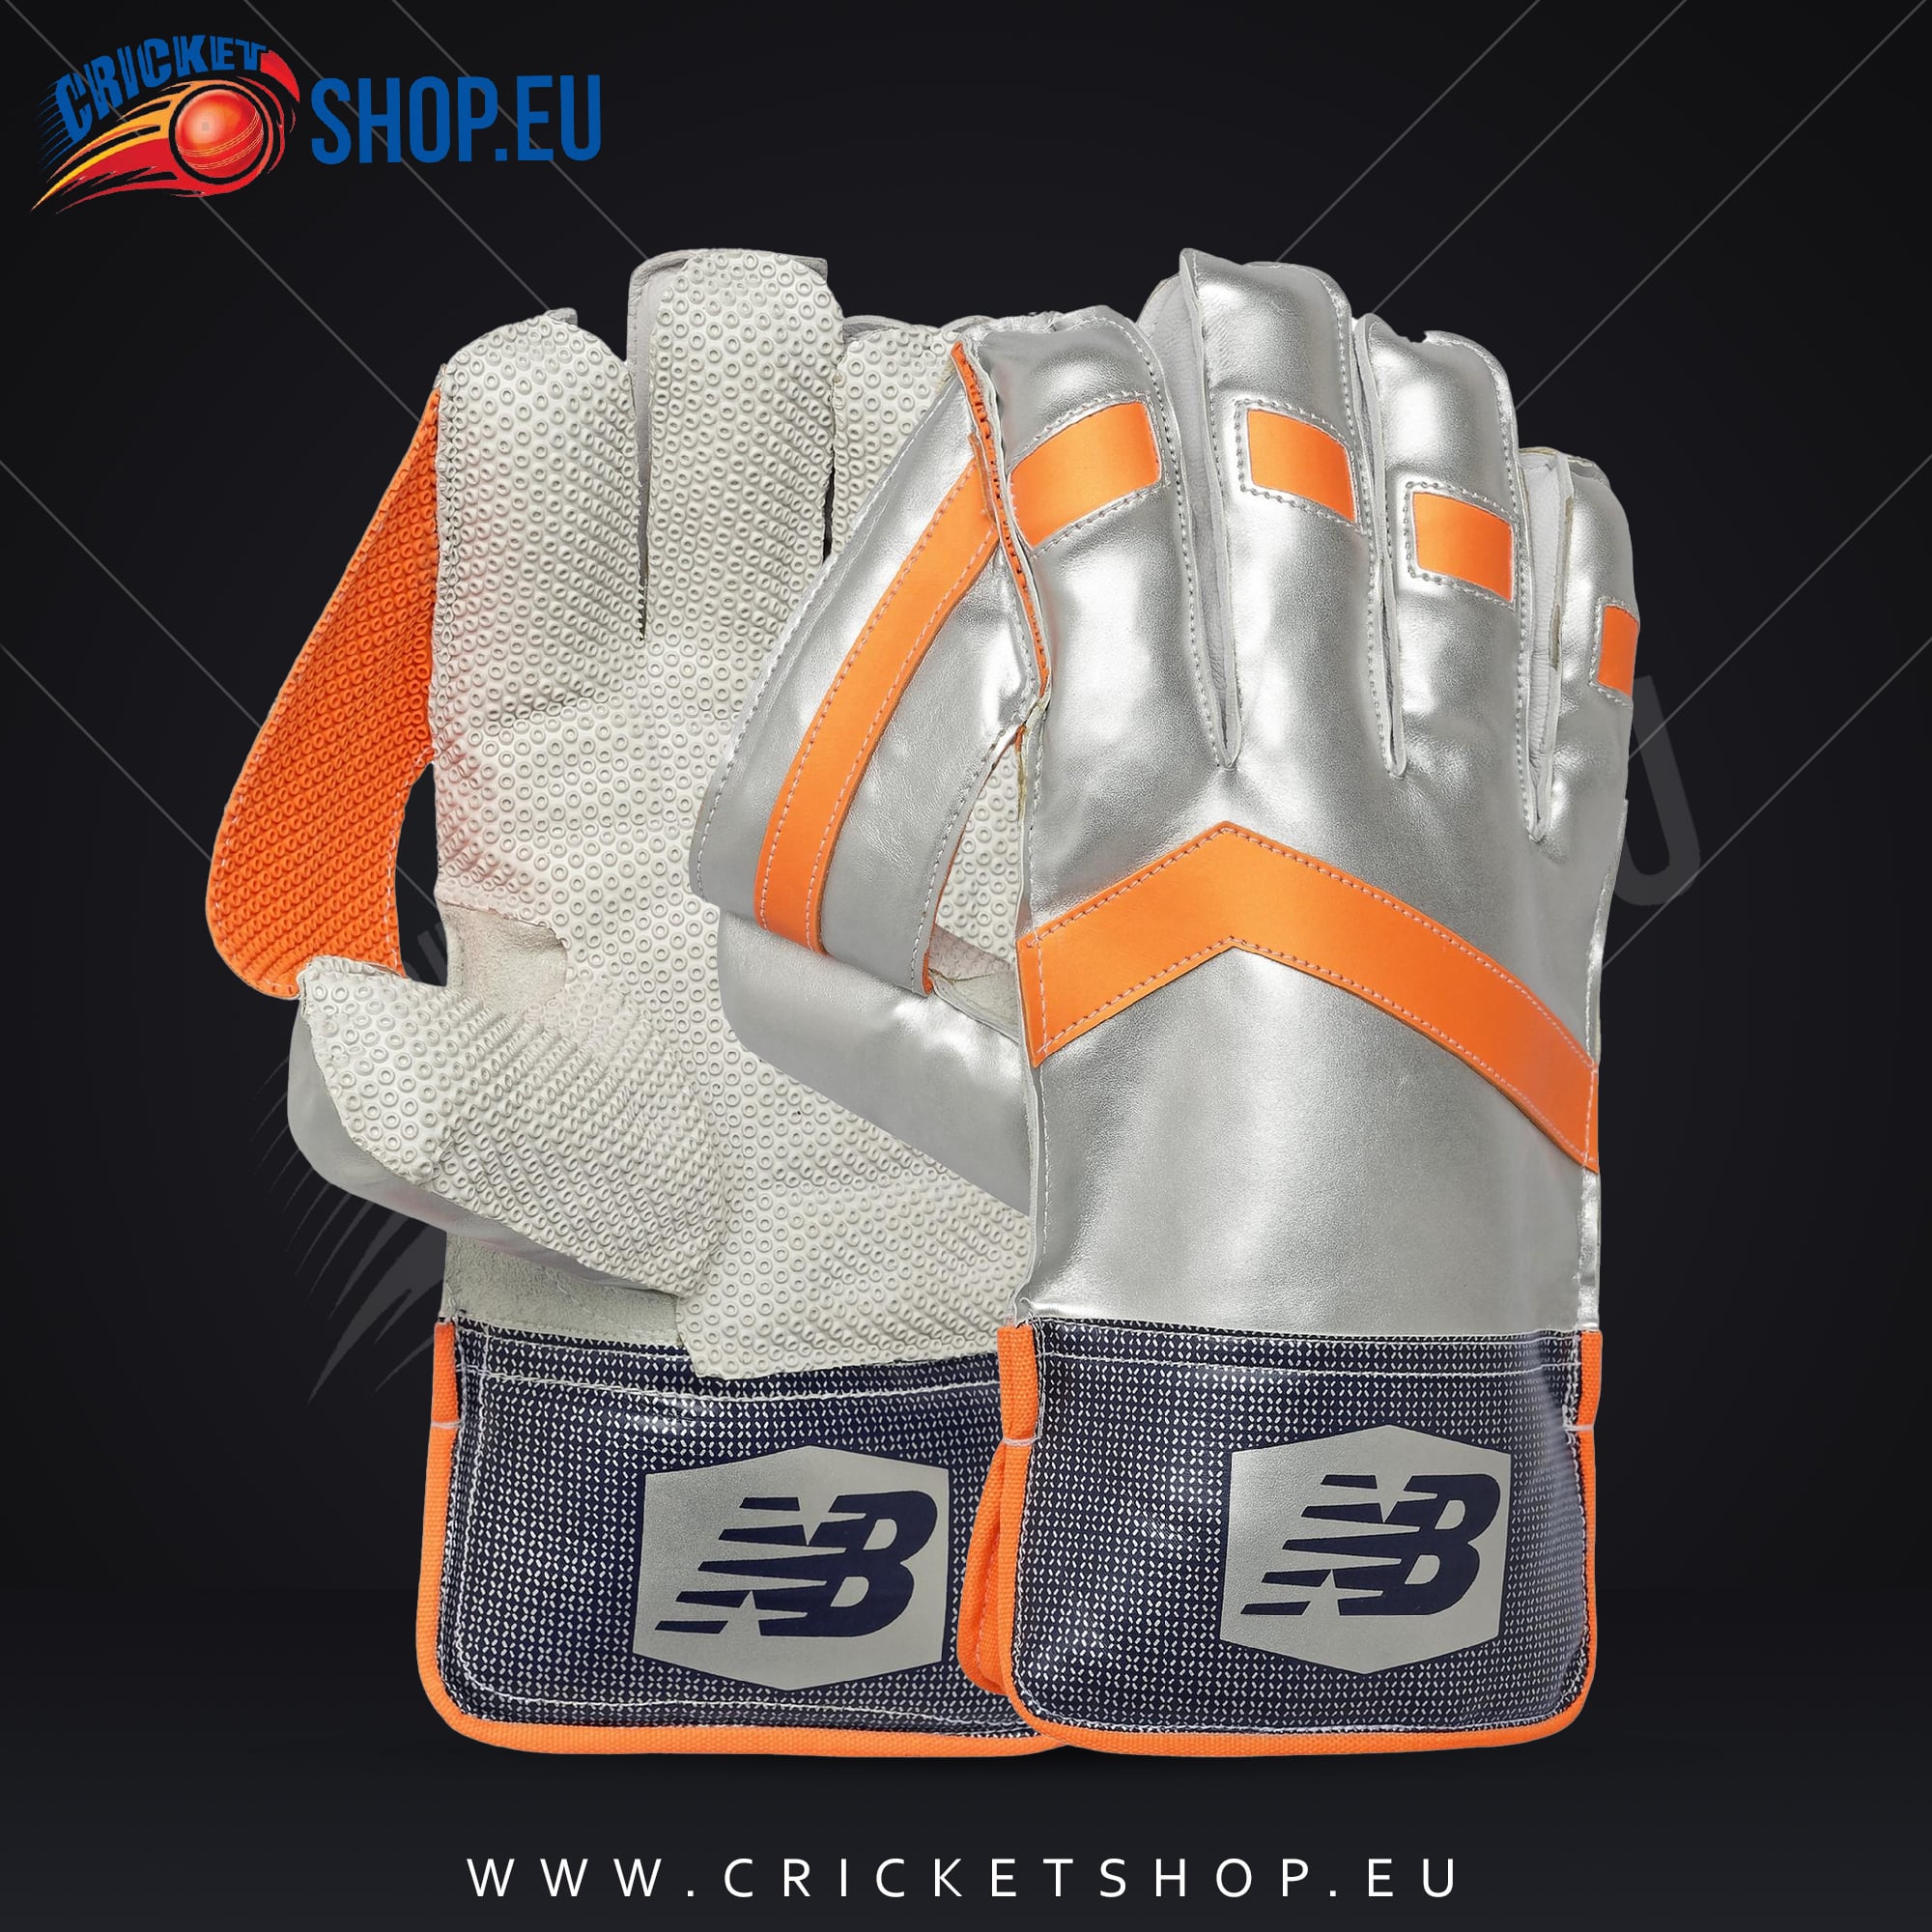 2023 New Balance DC 580 Wicket Keeping Gloves